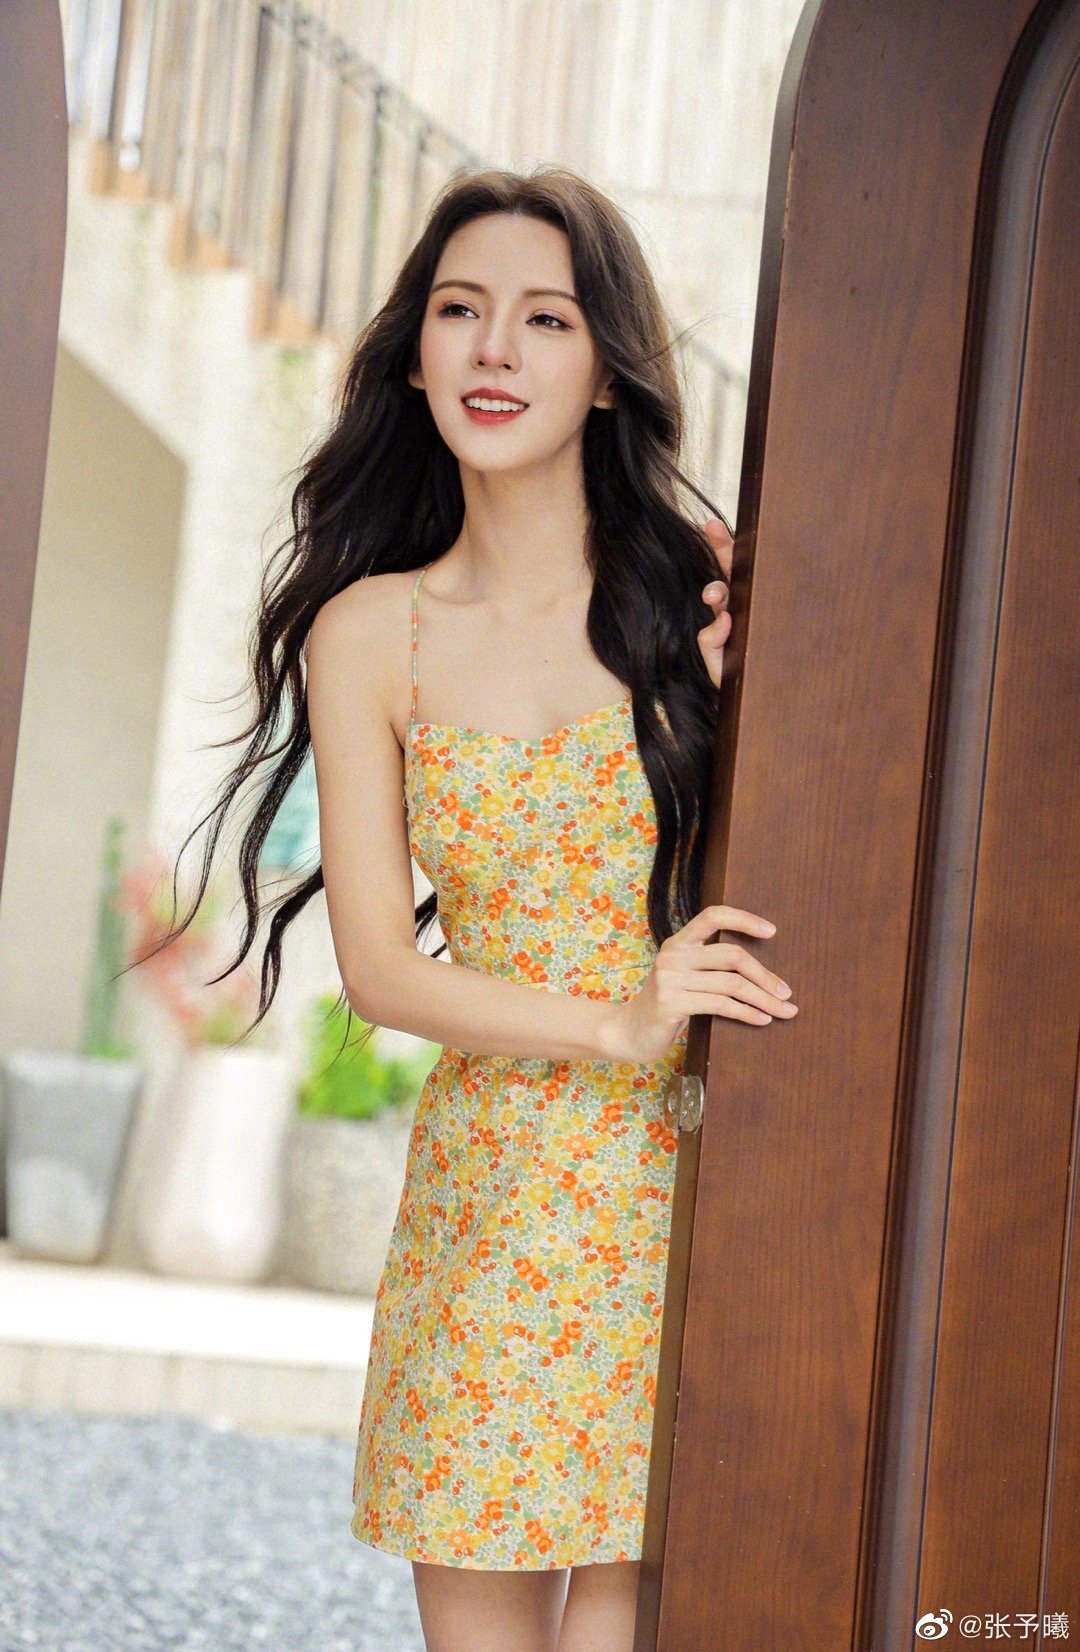 Zhang Yuxi Floral Skirt Six Square Grid Photo #Zhang Yuxi Shared Floral Skirt Photo, The Summer Feeling Is Really Super Comfortable Is The First Floral Skirt At First Glance, How So Like